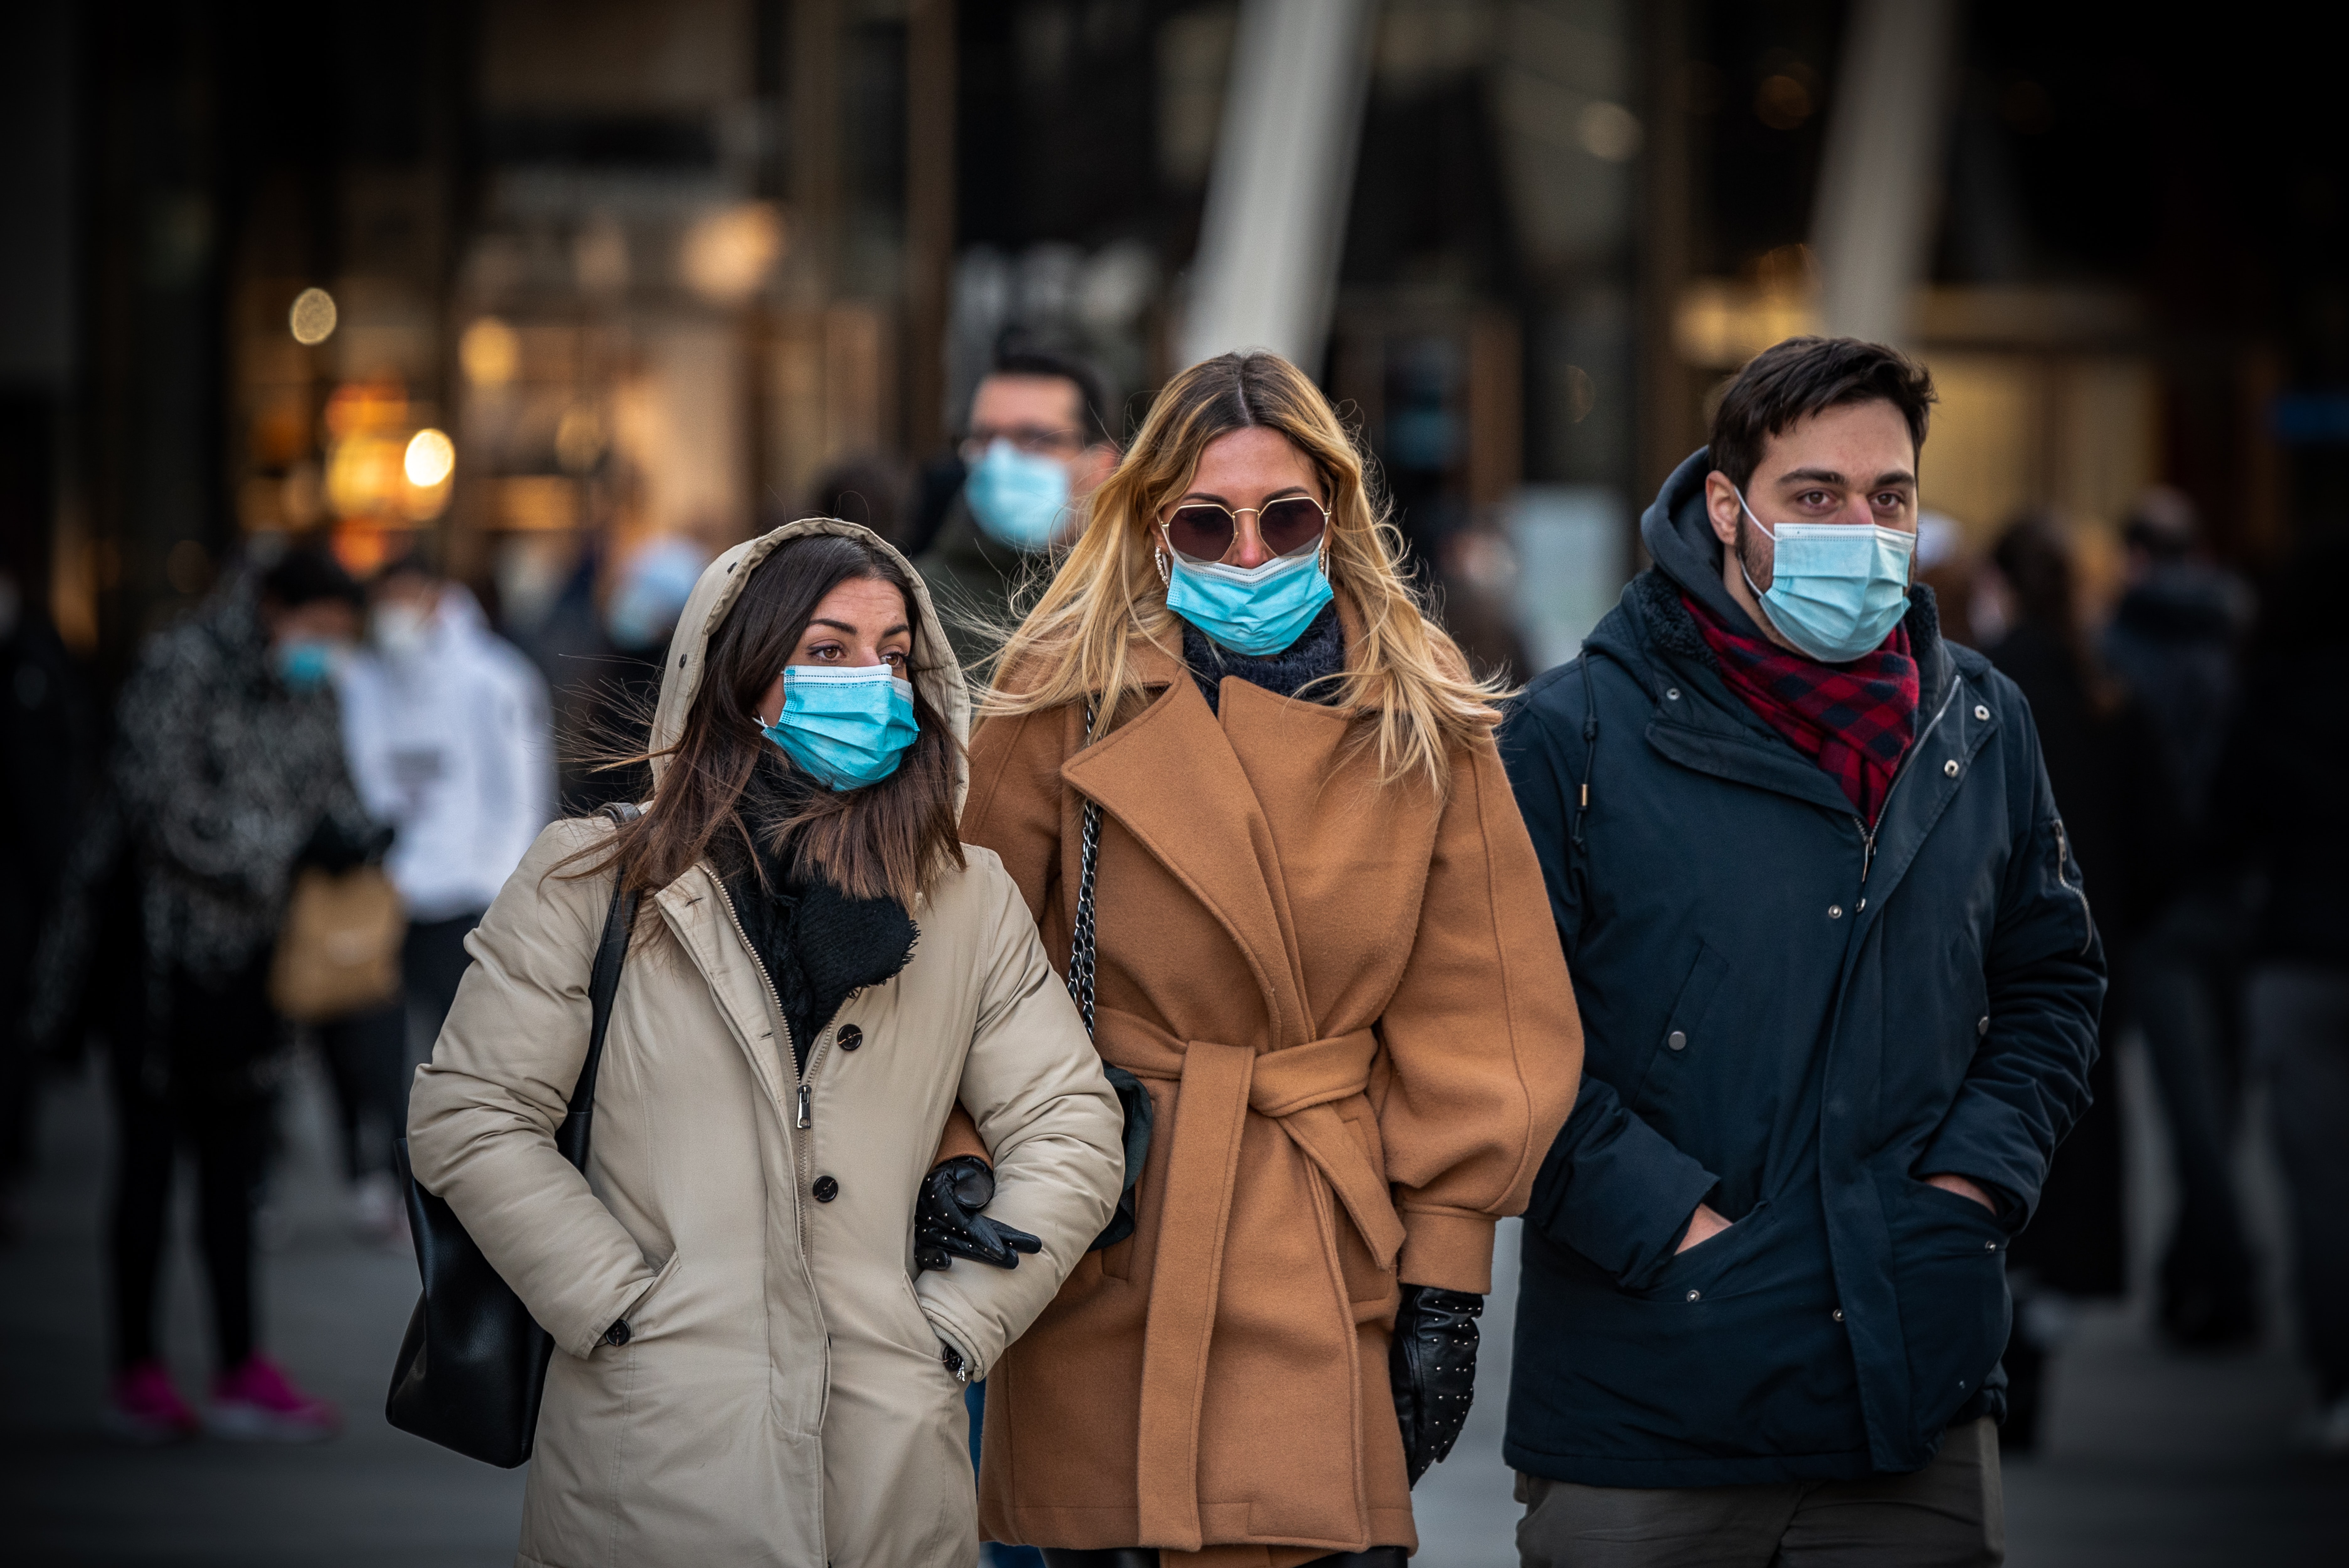 three adults two woman and a man walk down an urban street and wear masks